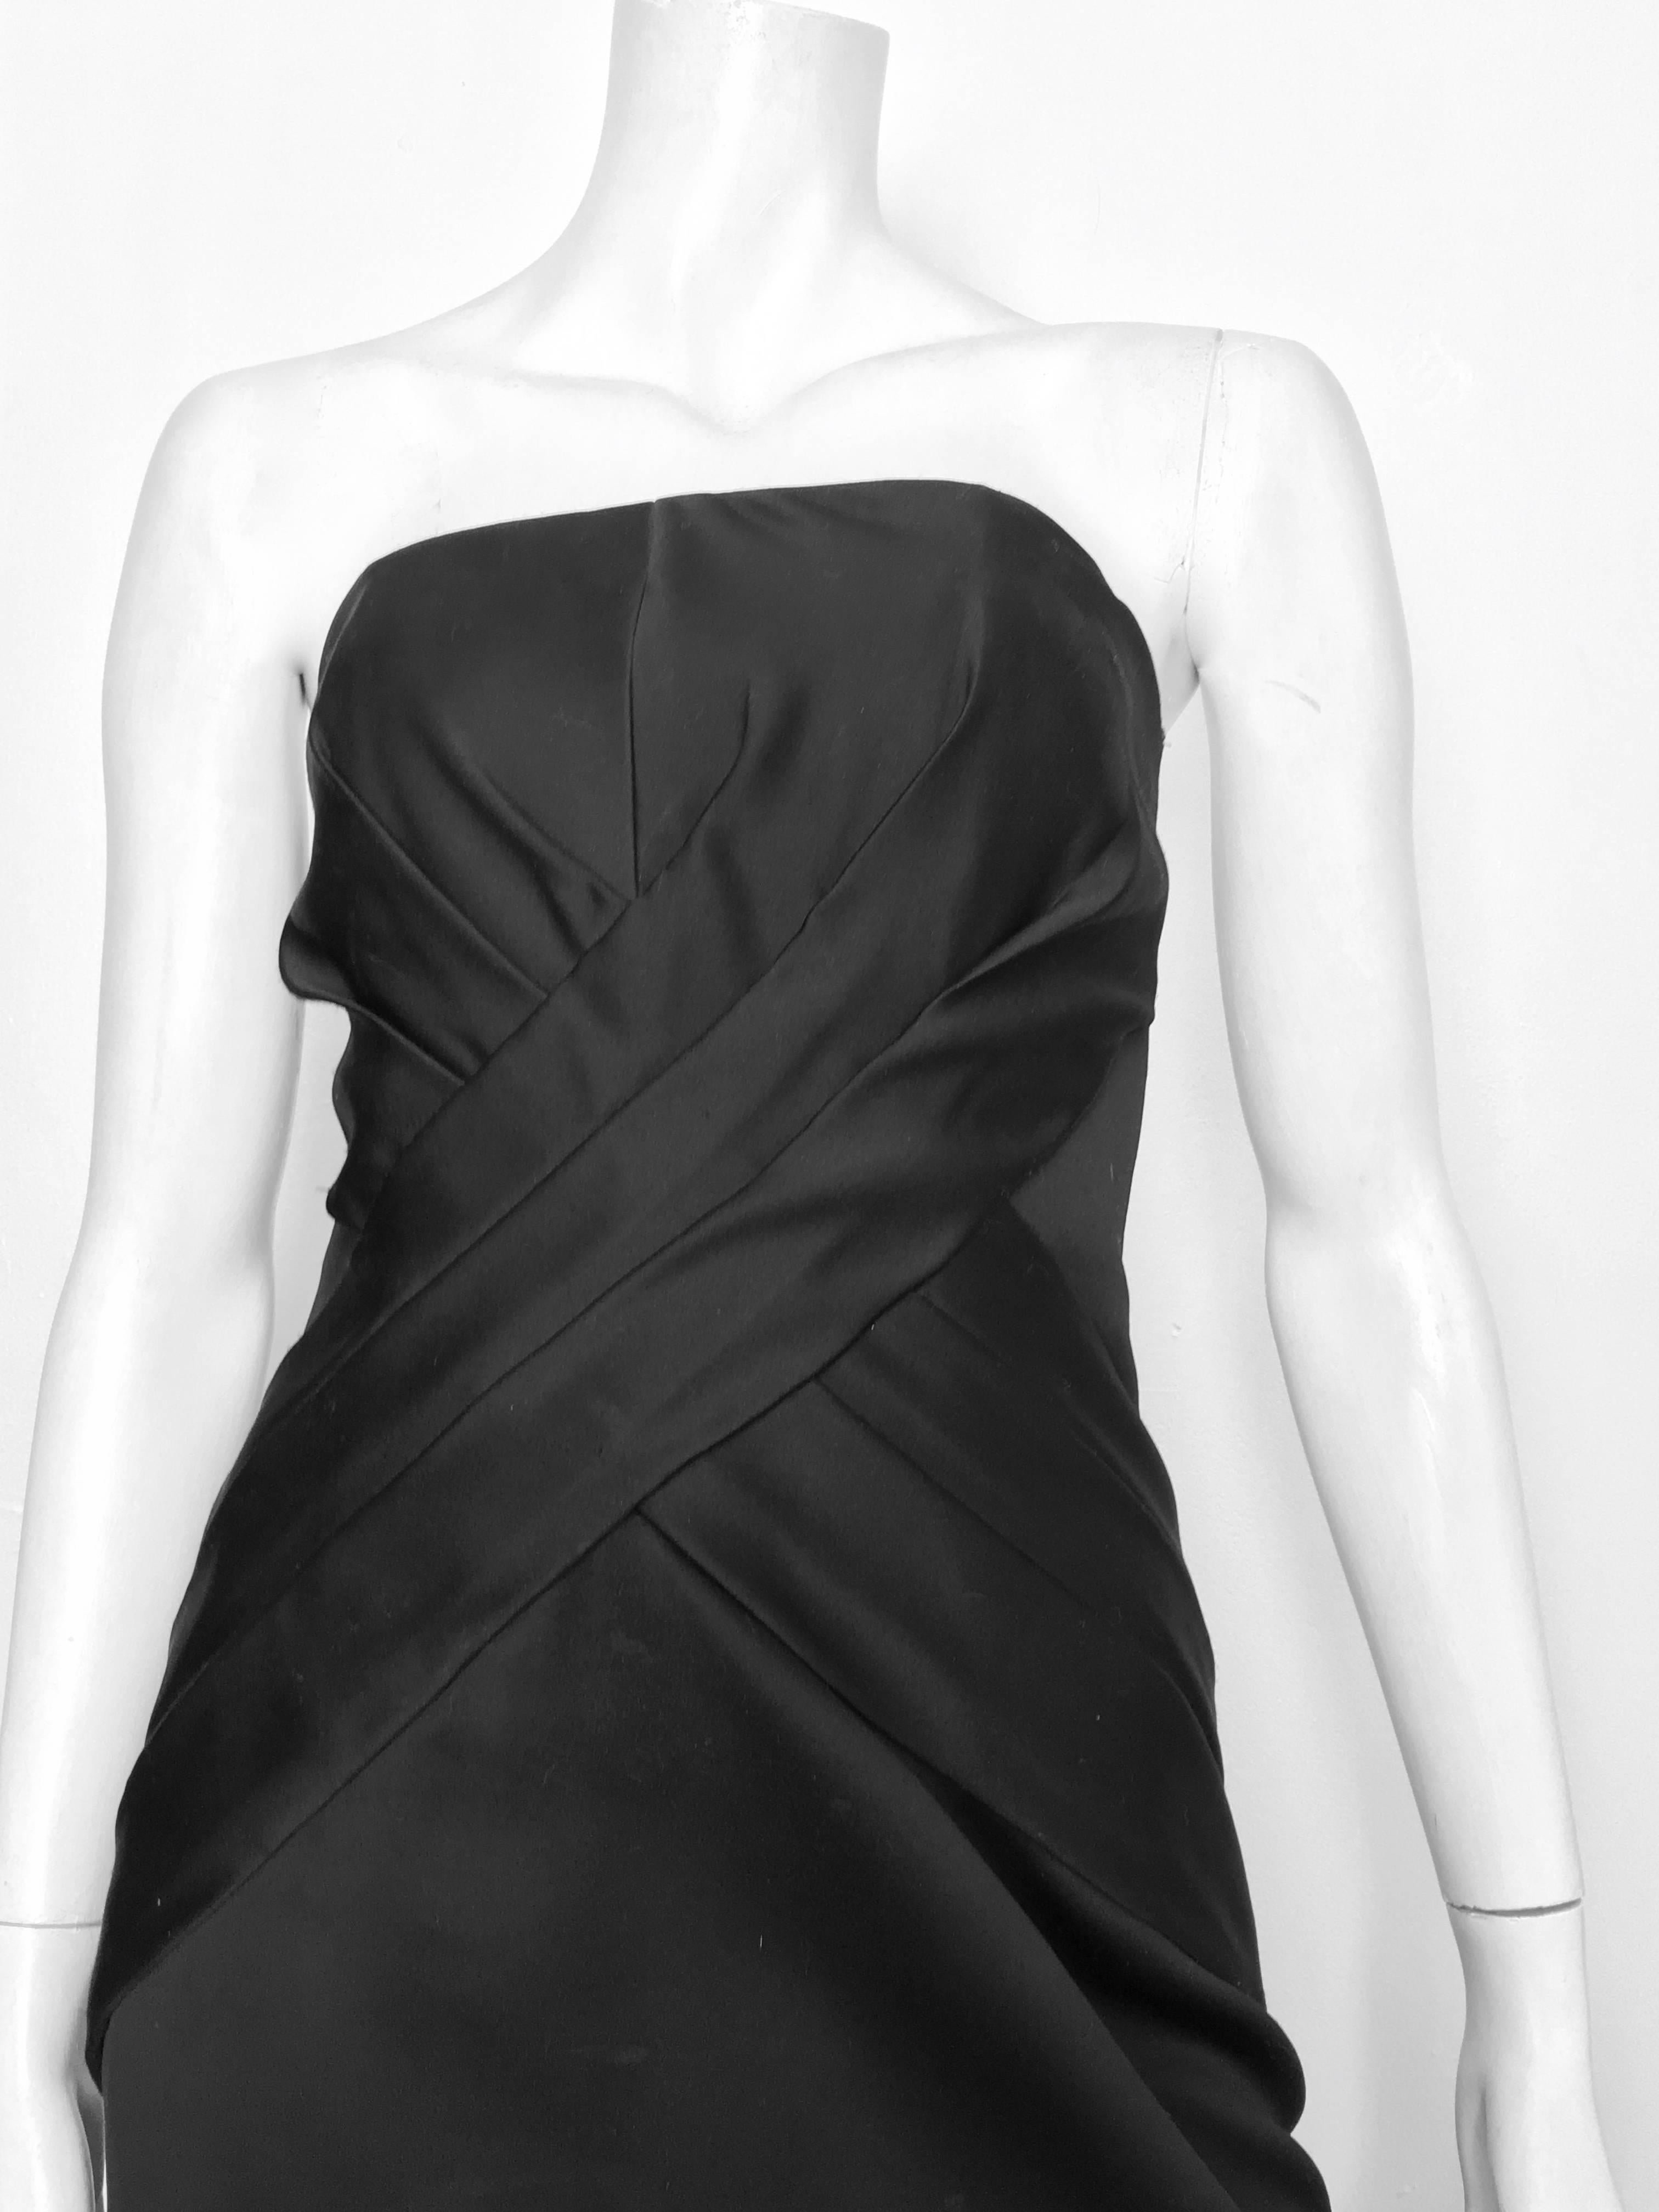 Victor Costa for Bergdorf Goodman Black Strapless Red Carpet Gown Size 4, 1980s In Excellent Condition For Sale In Atlanta, GA